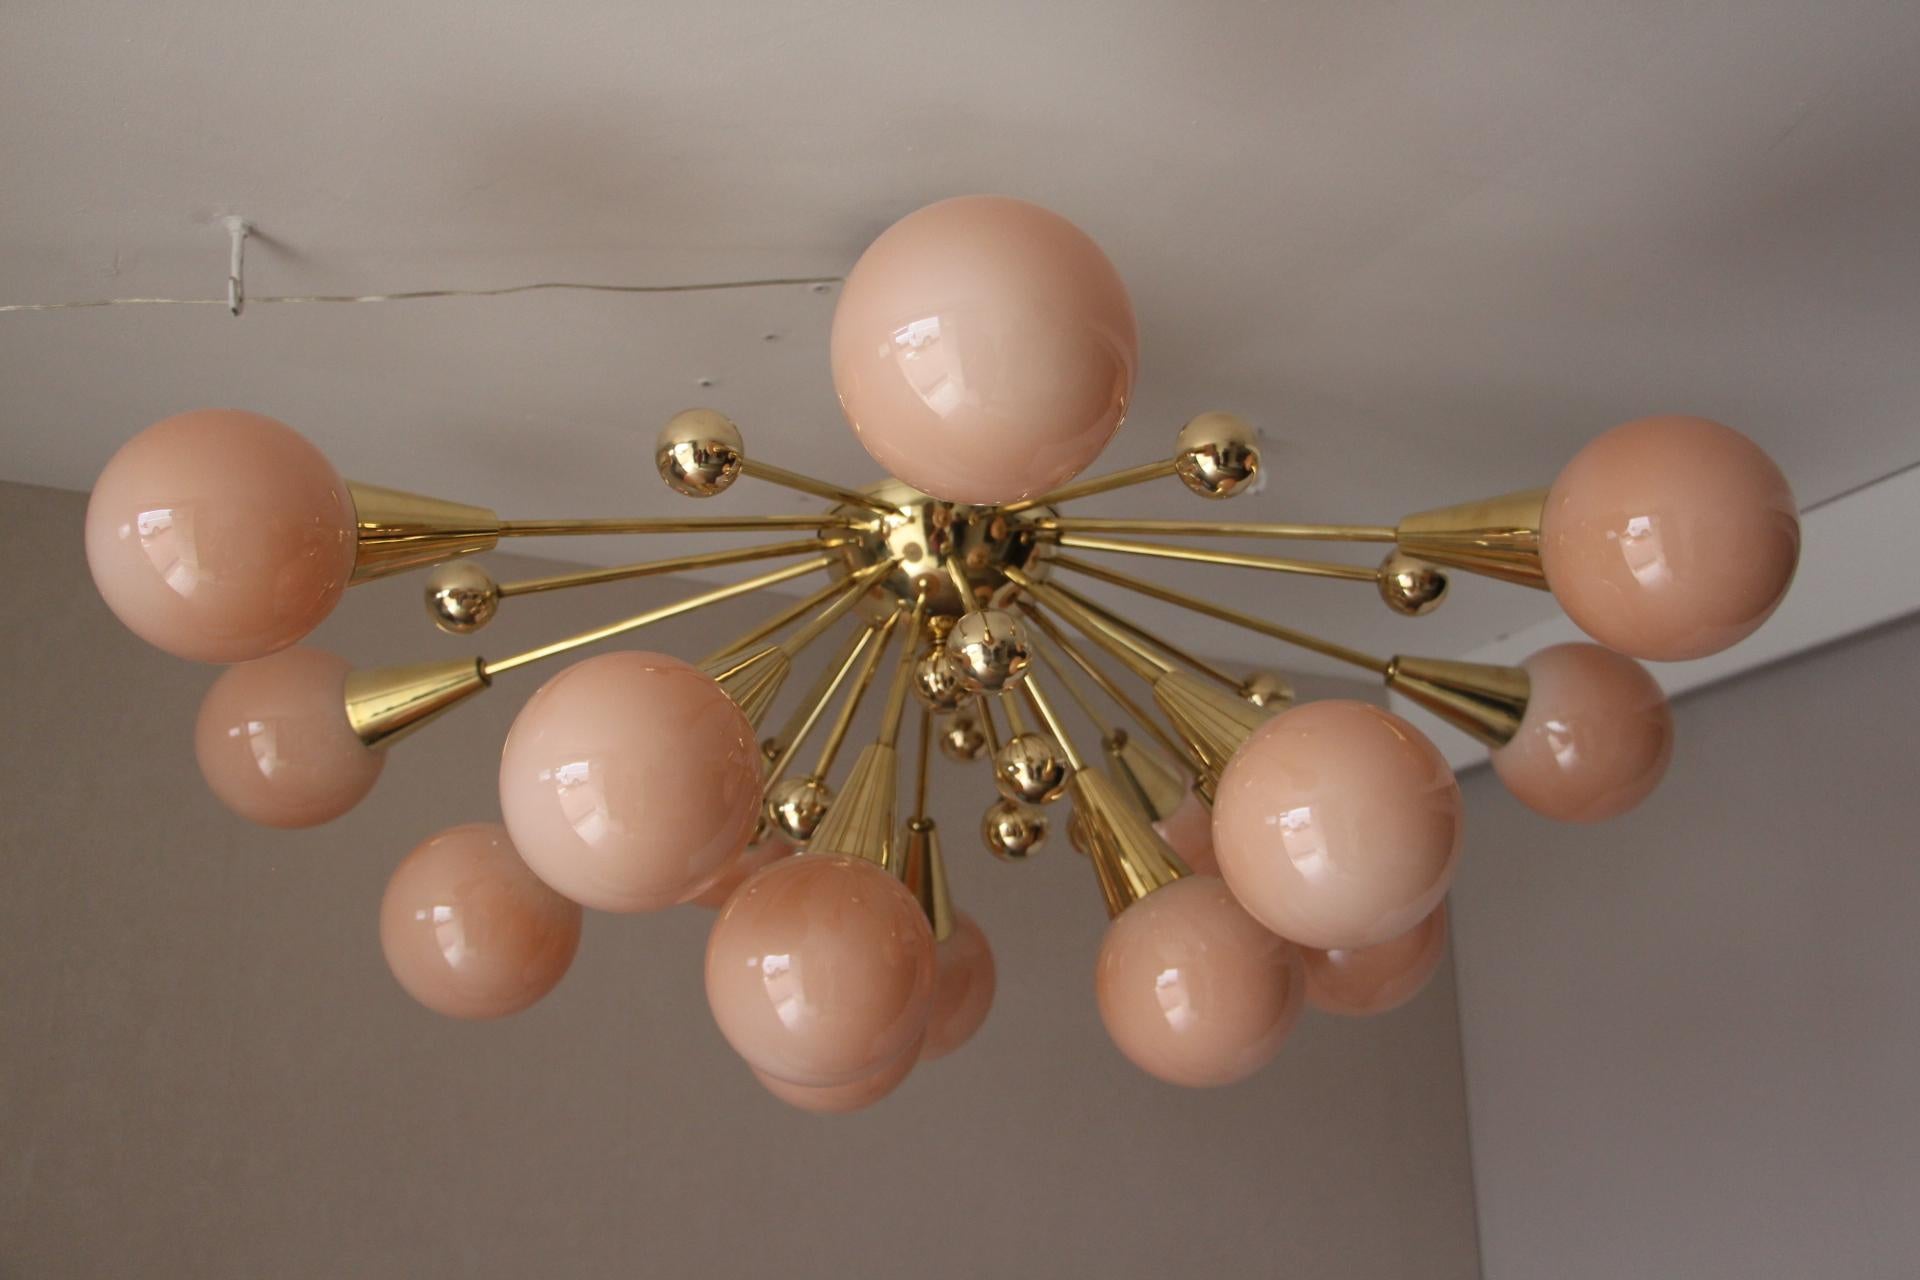 This fabulous chandelier features 15 pinkish-beige handmade Murano glass globes and 15 brass balls extends on brass stems from its centre.
When light is on, its very light pink-beige globes turn to beige color.
All globes are not exactly the same